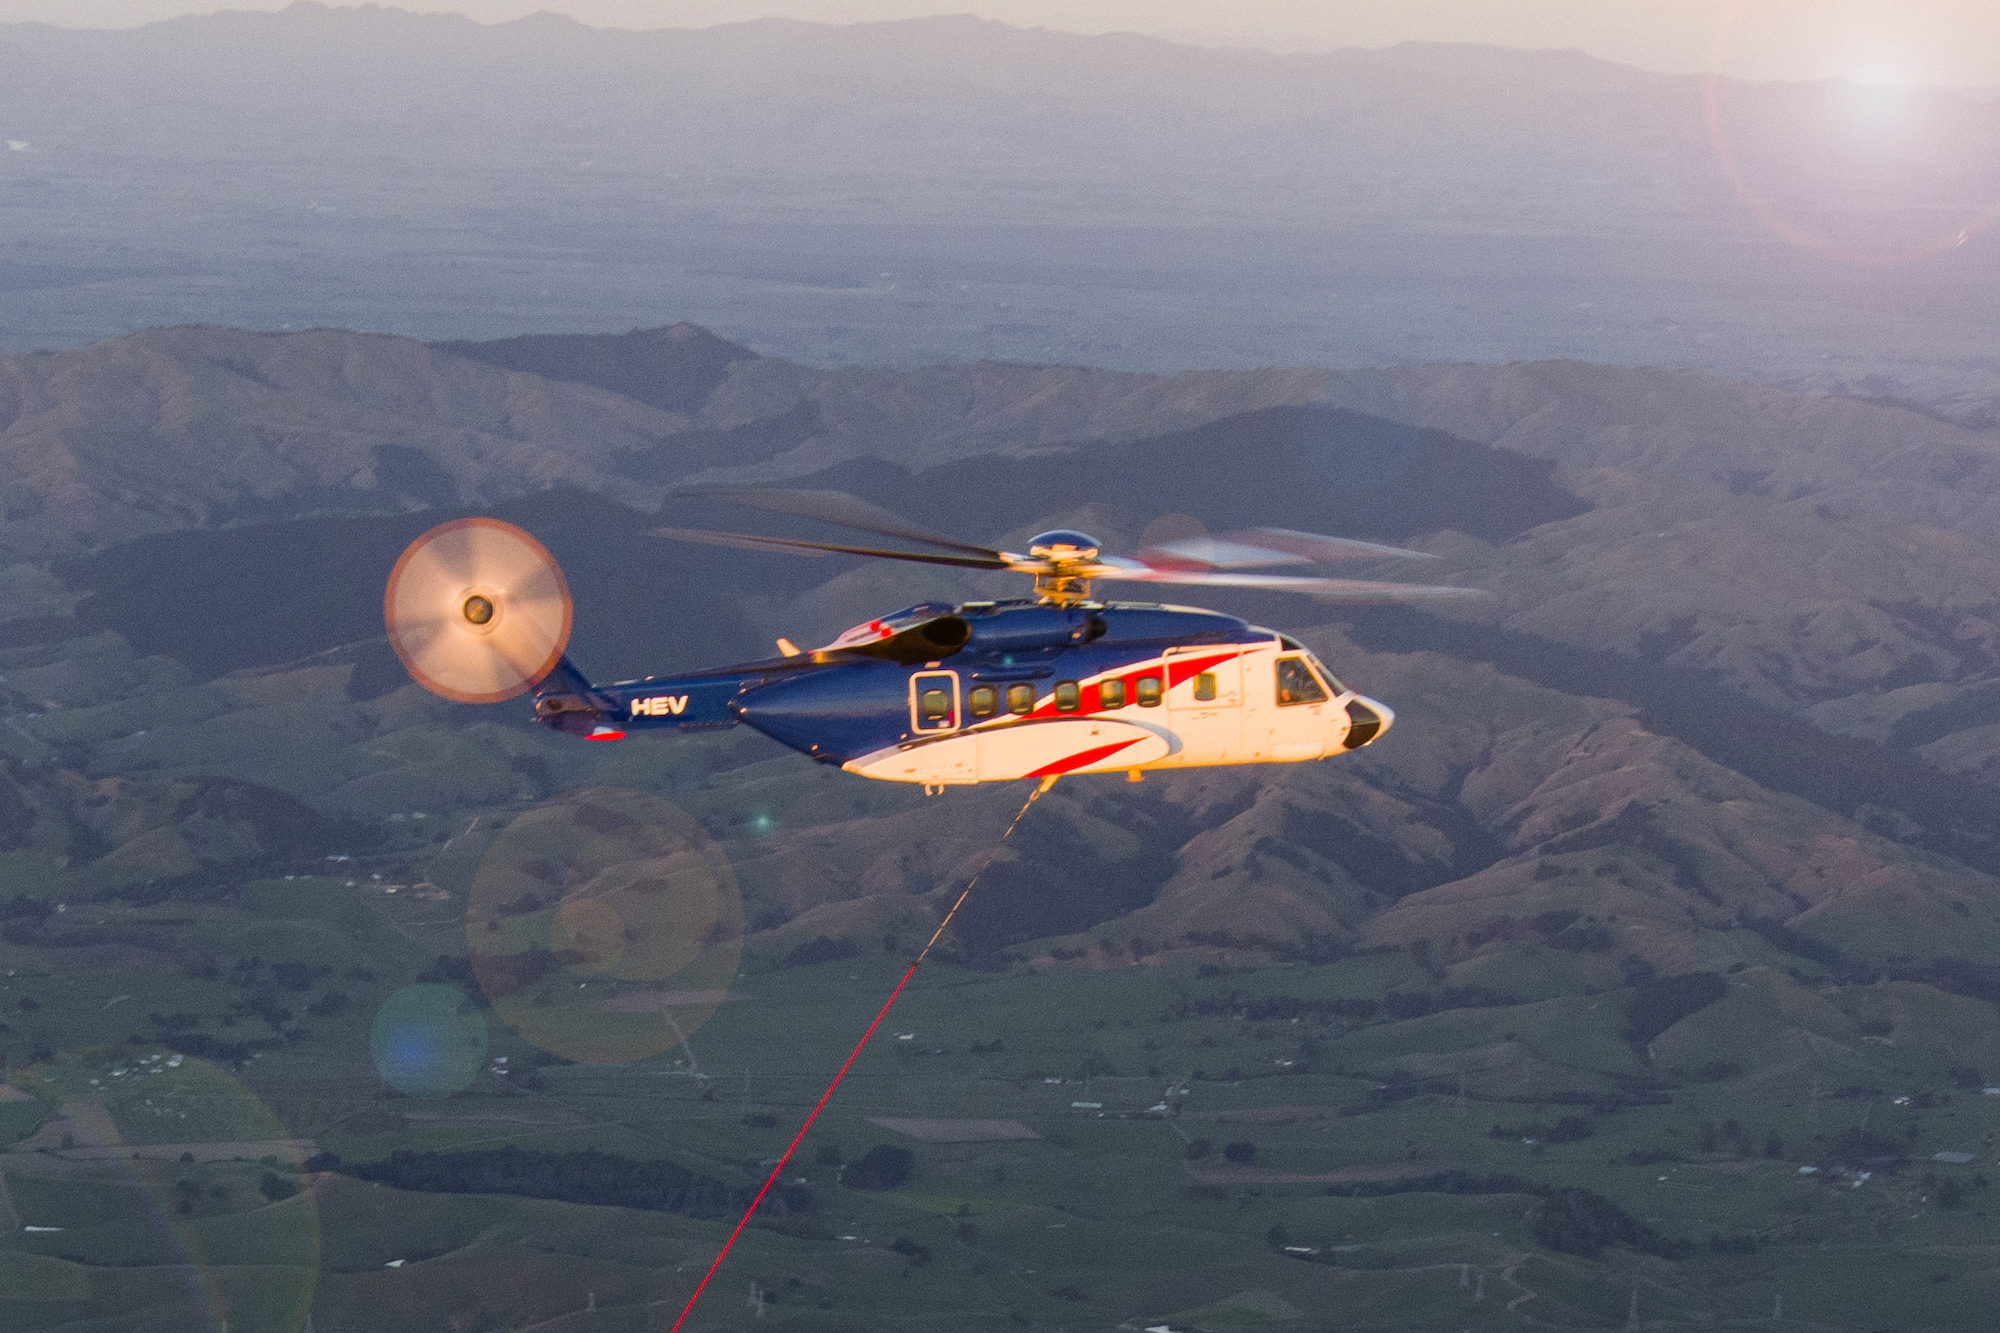 A helicopter caught and released a rocket this week